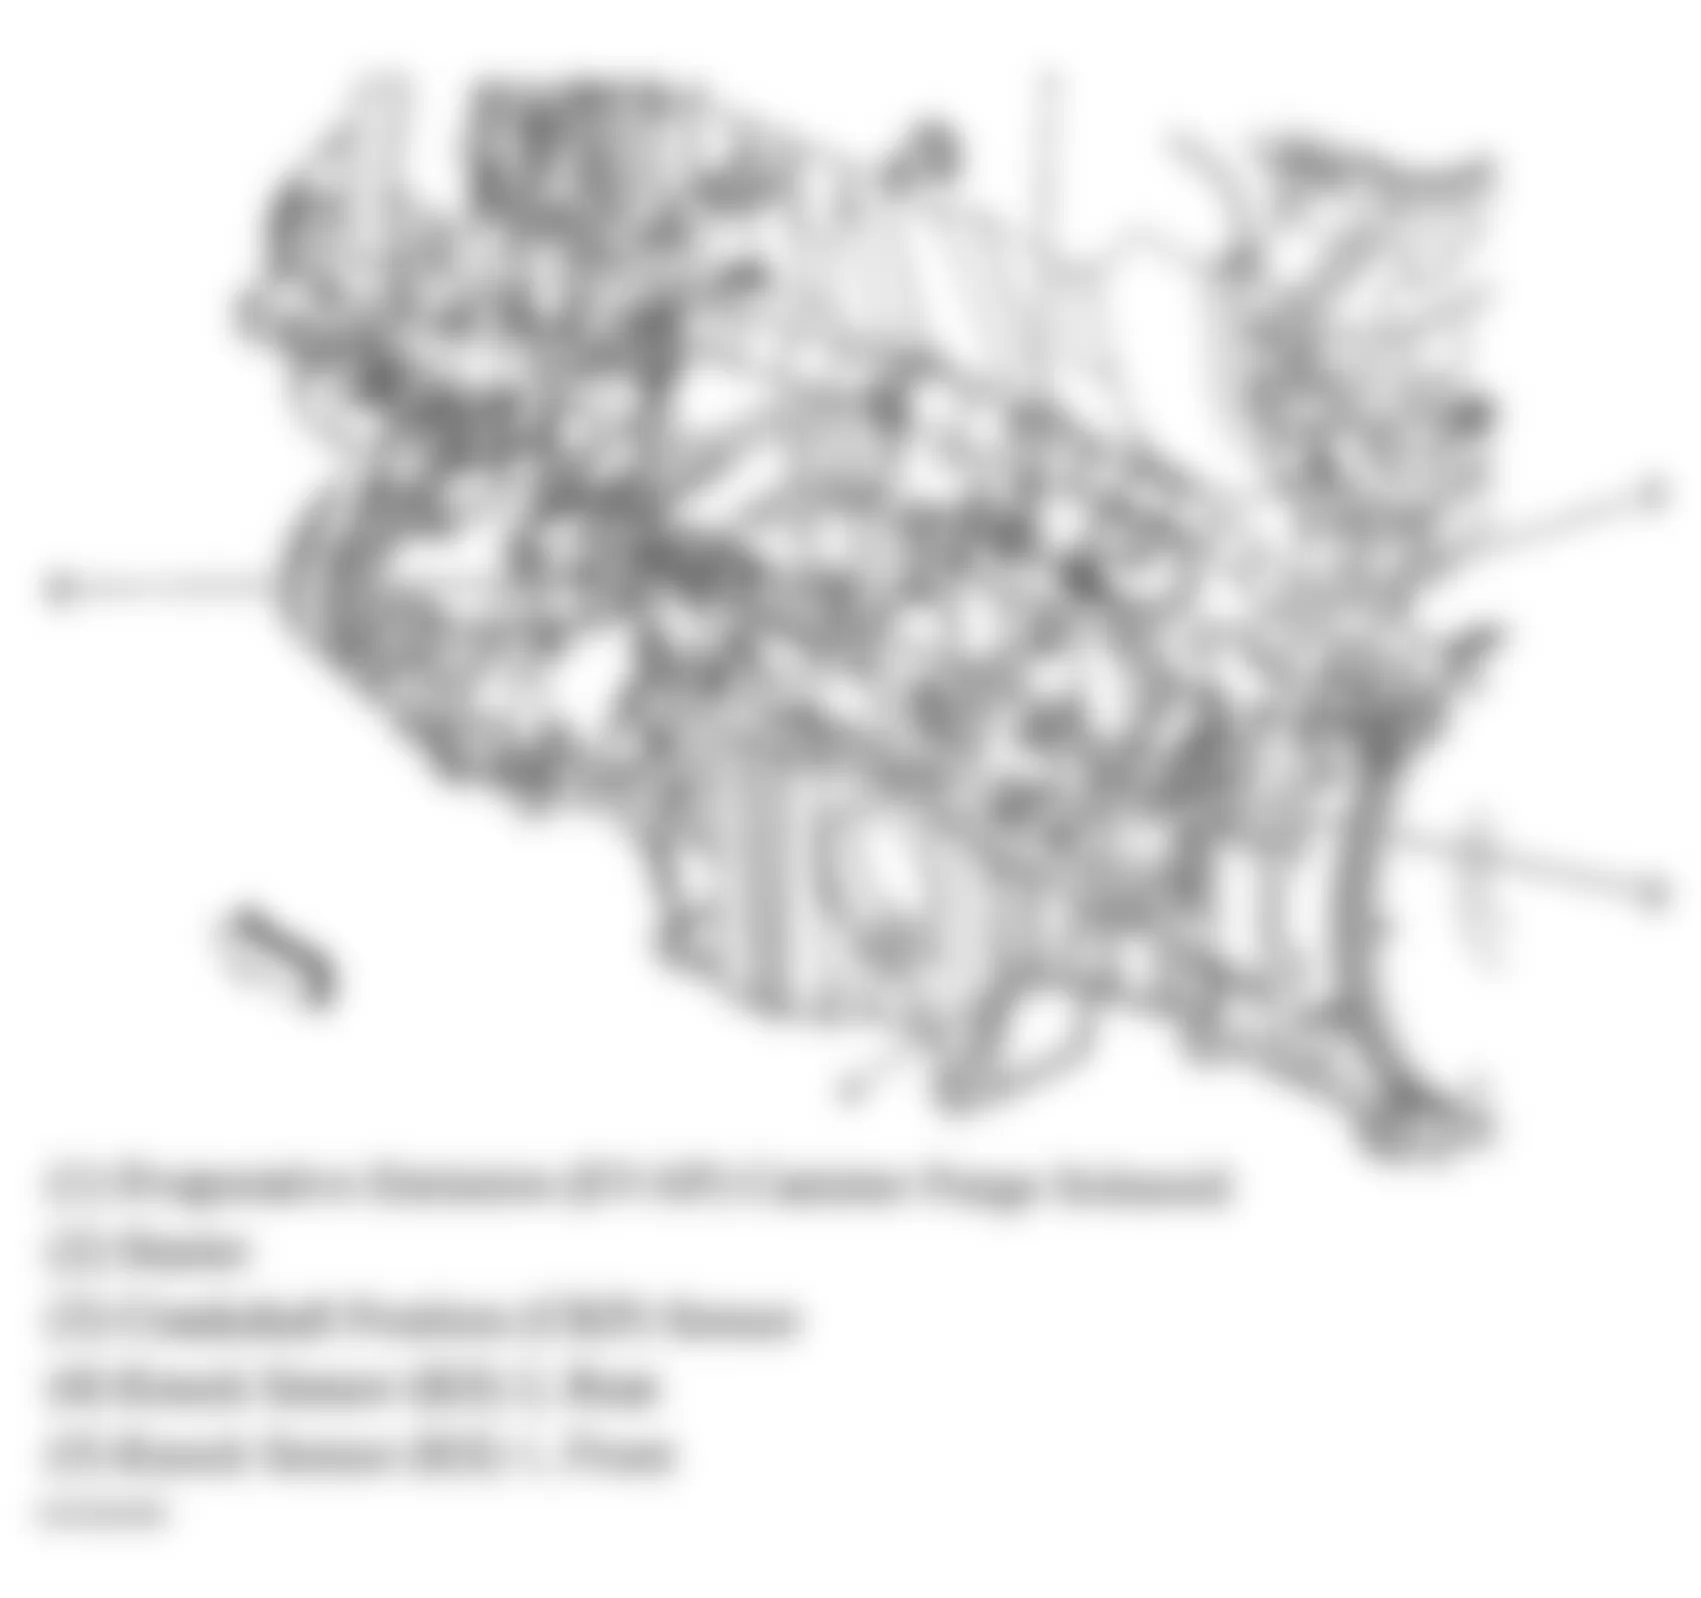 GMC Envoy 2005 - Component Locations -  Lower Left Side Of Engine (4.2L)